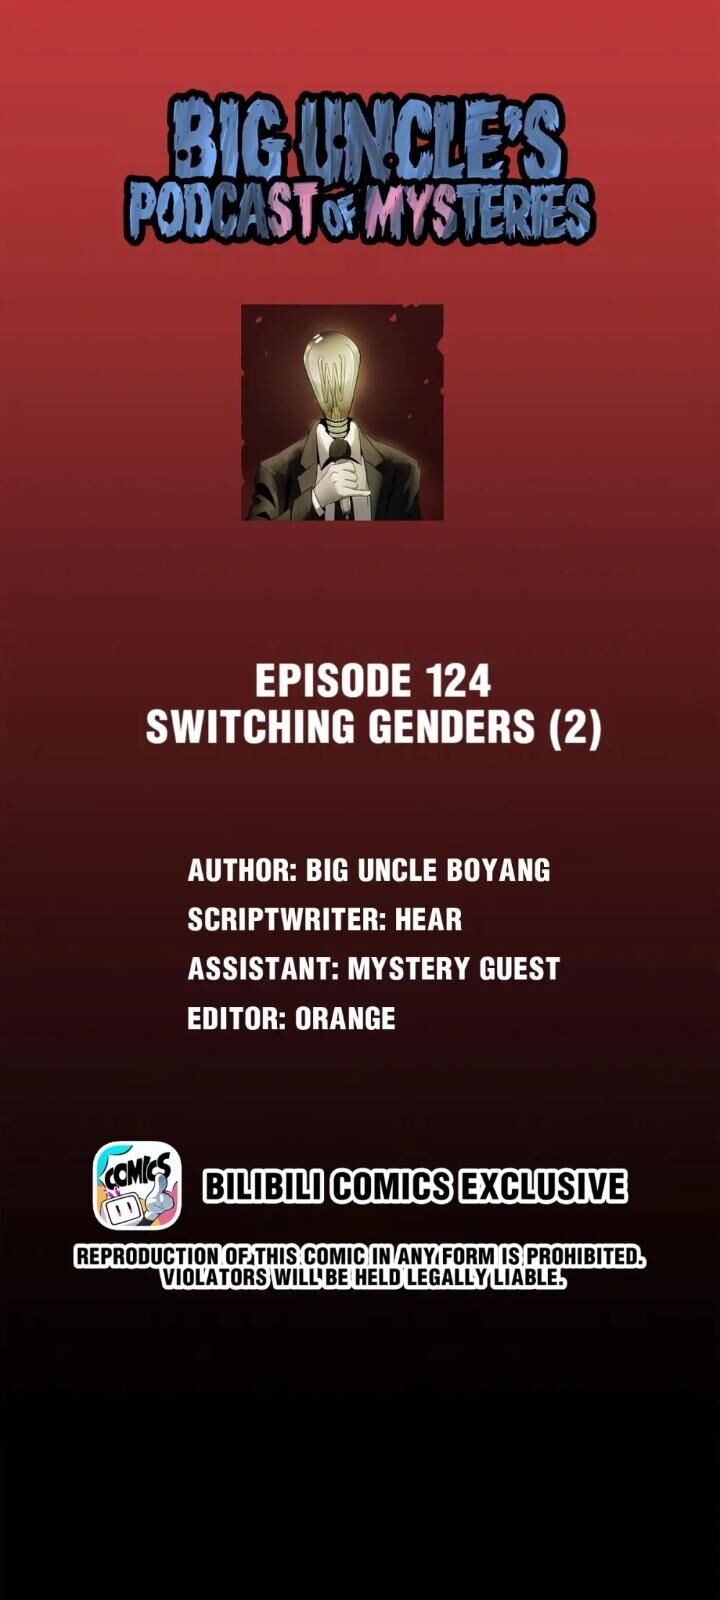 Big Uncle's Podcast of Mysteries Big Uncle's Podcast of Mysteries Ch.126